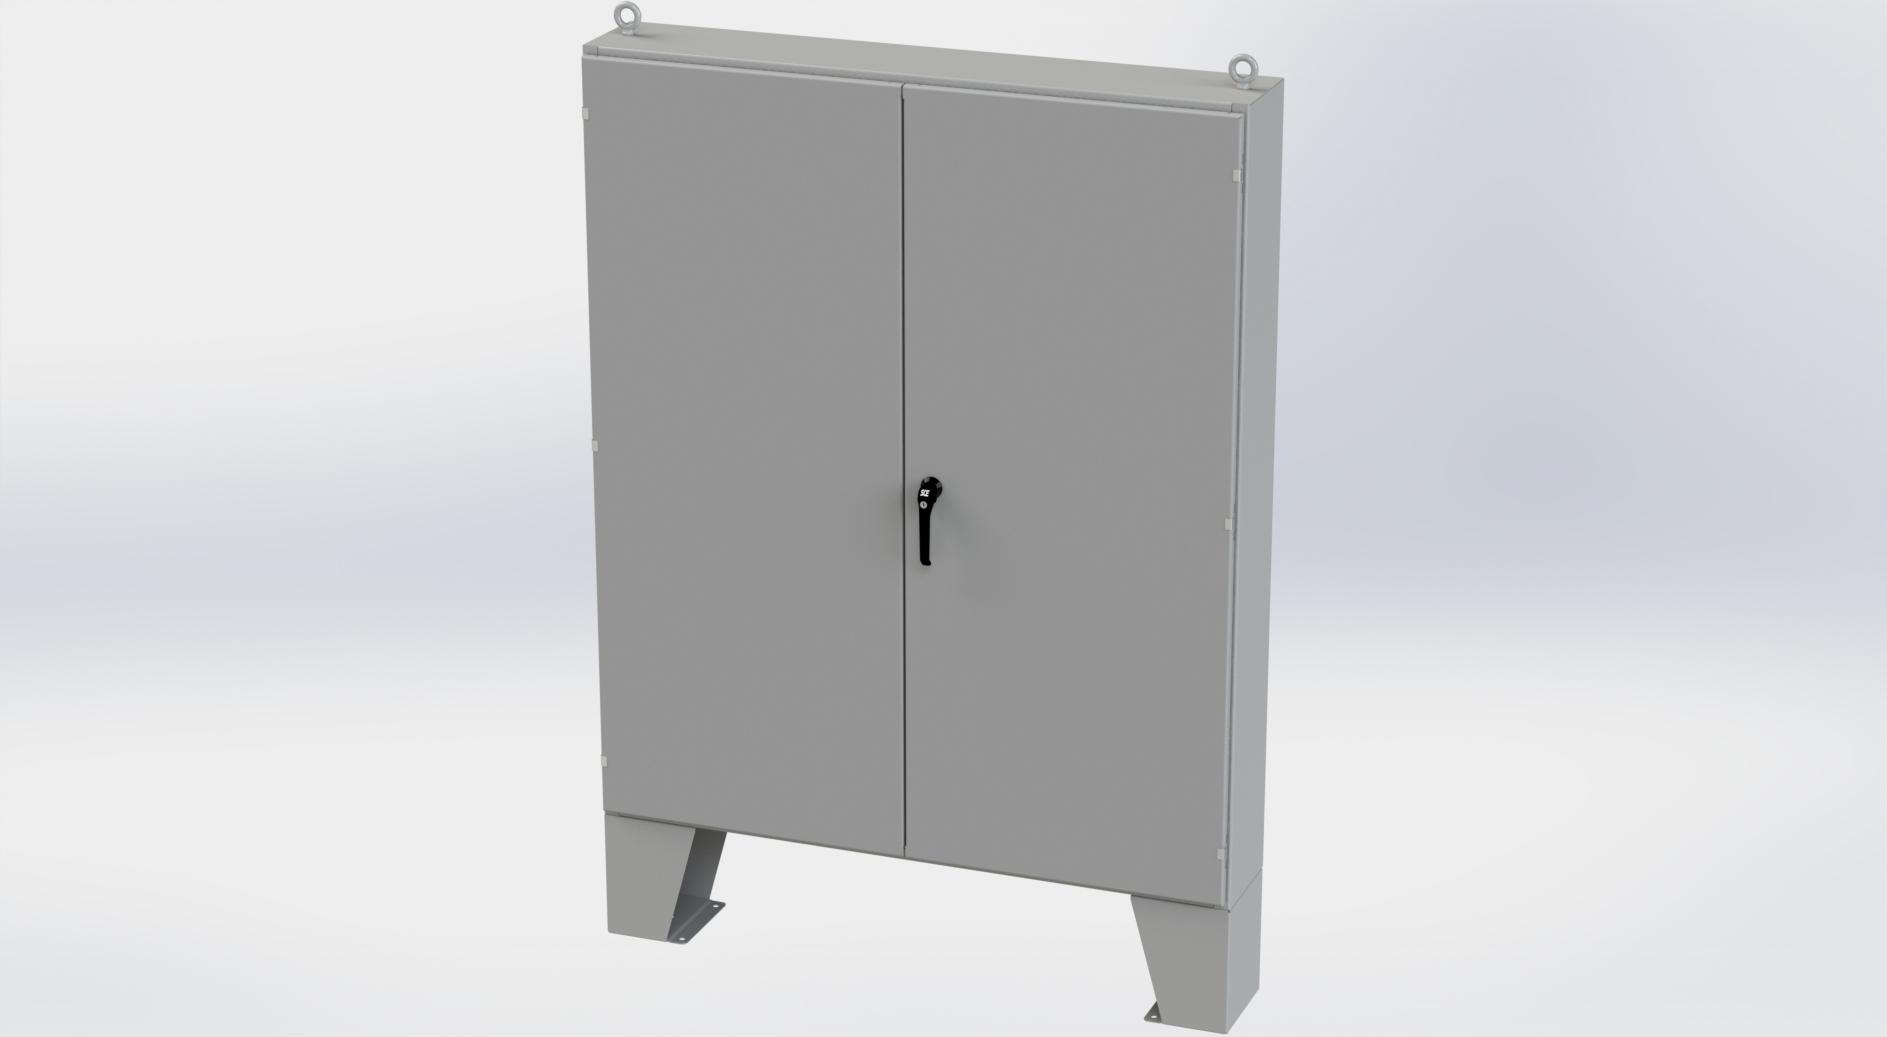 Saginaw Control SCE-726010ULP 2DR LP Enclosure, Height:72.00", Width:60.00", Depth:10.00", ANSI-61 gray powder coating inside and out. Optional sub-panels are powder coated white.